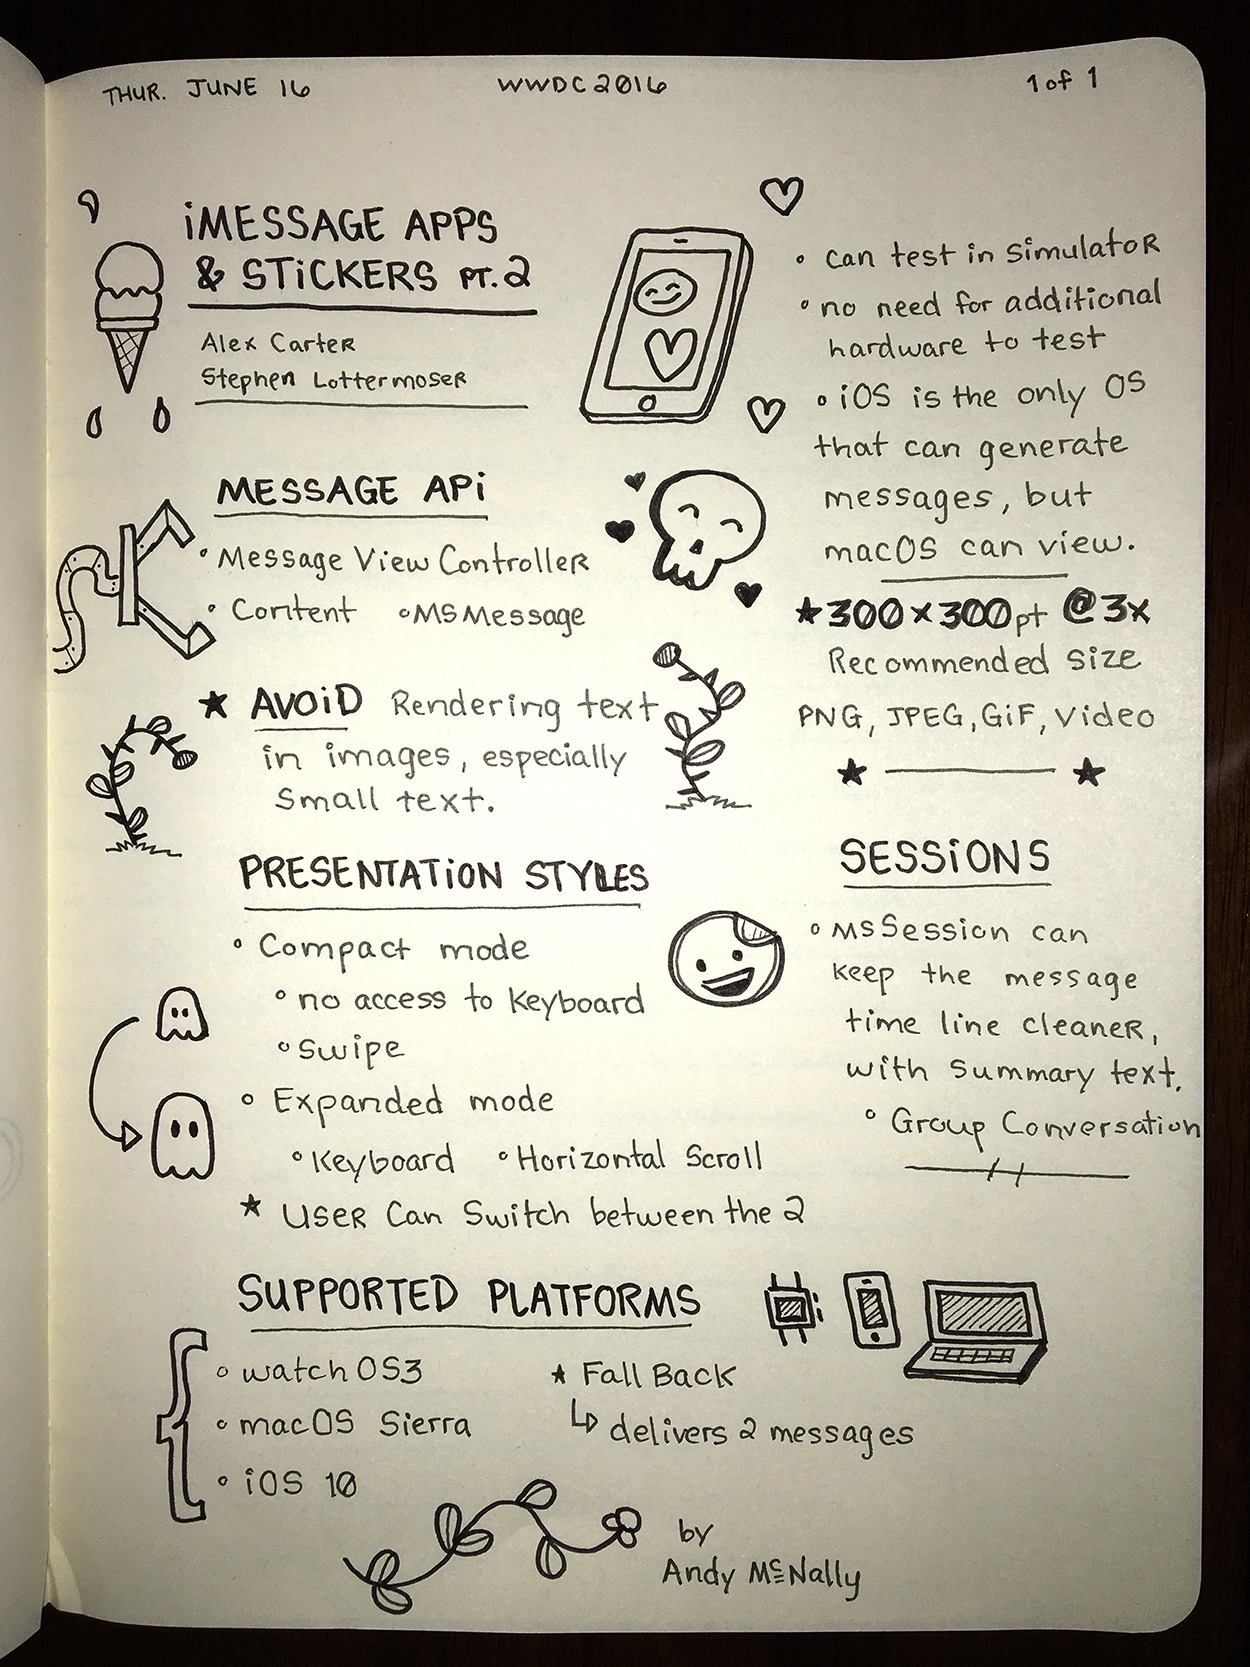 WWDC sketchnotes - iMessage Apps & Stickers Pt. 2